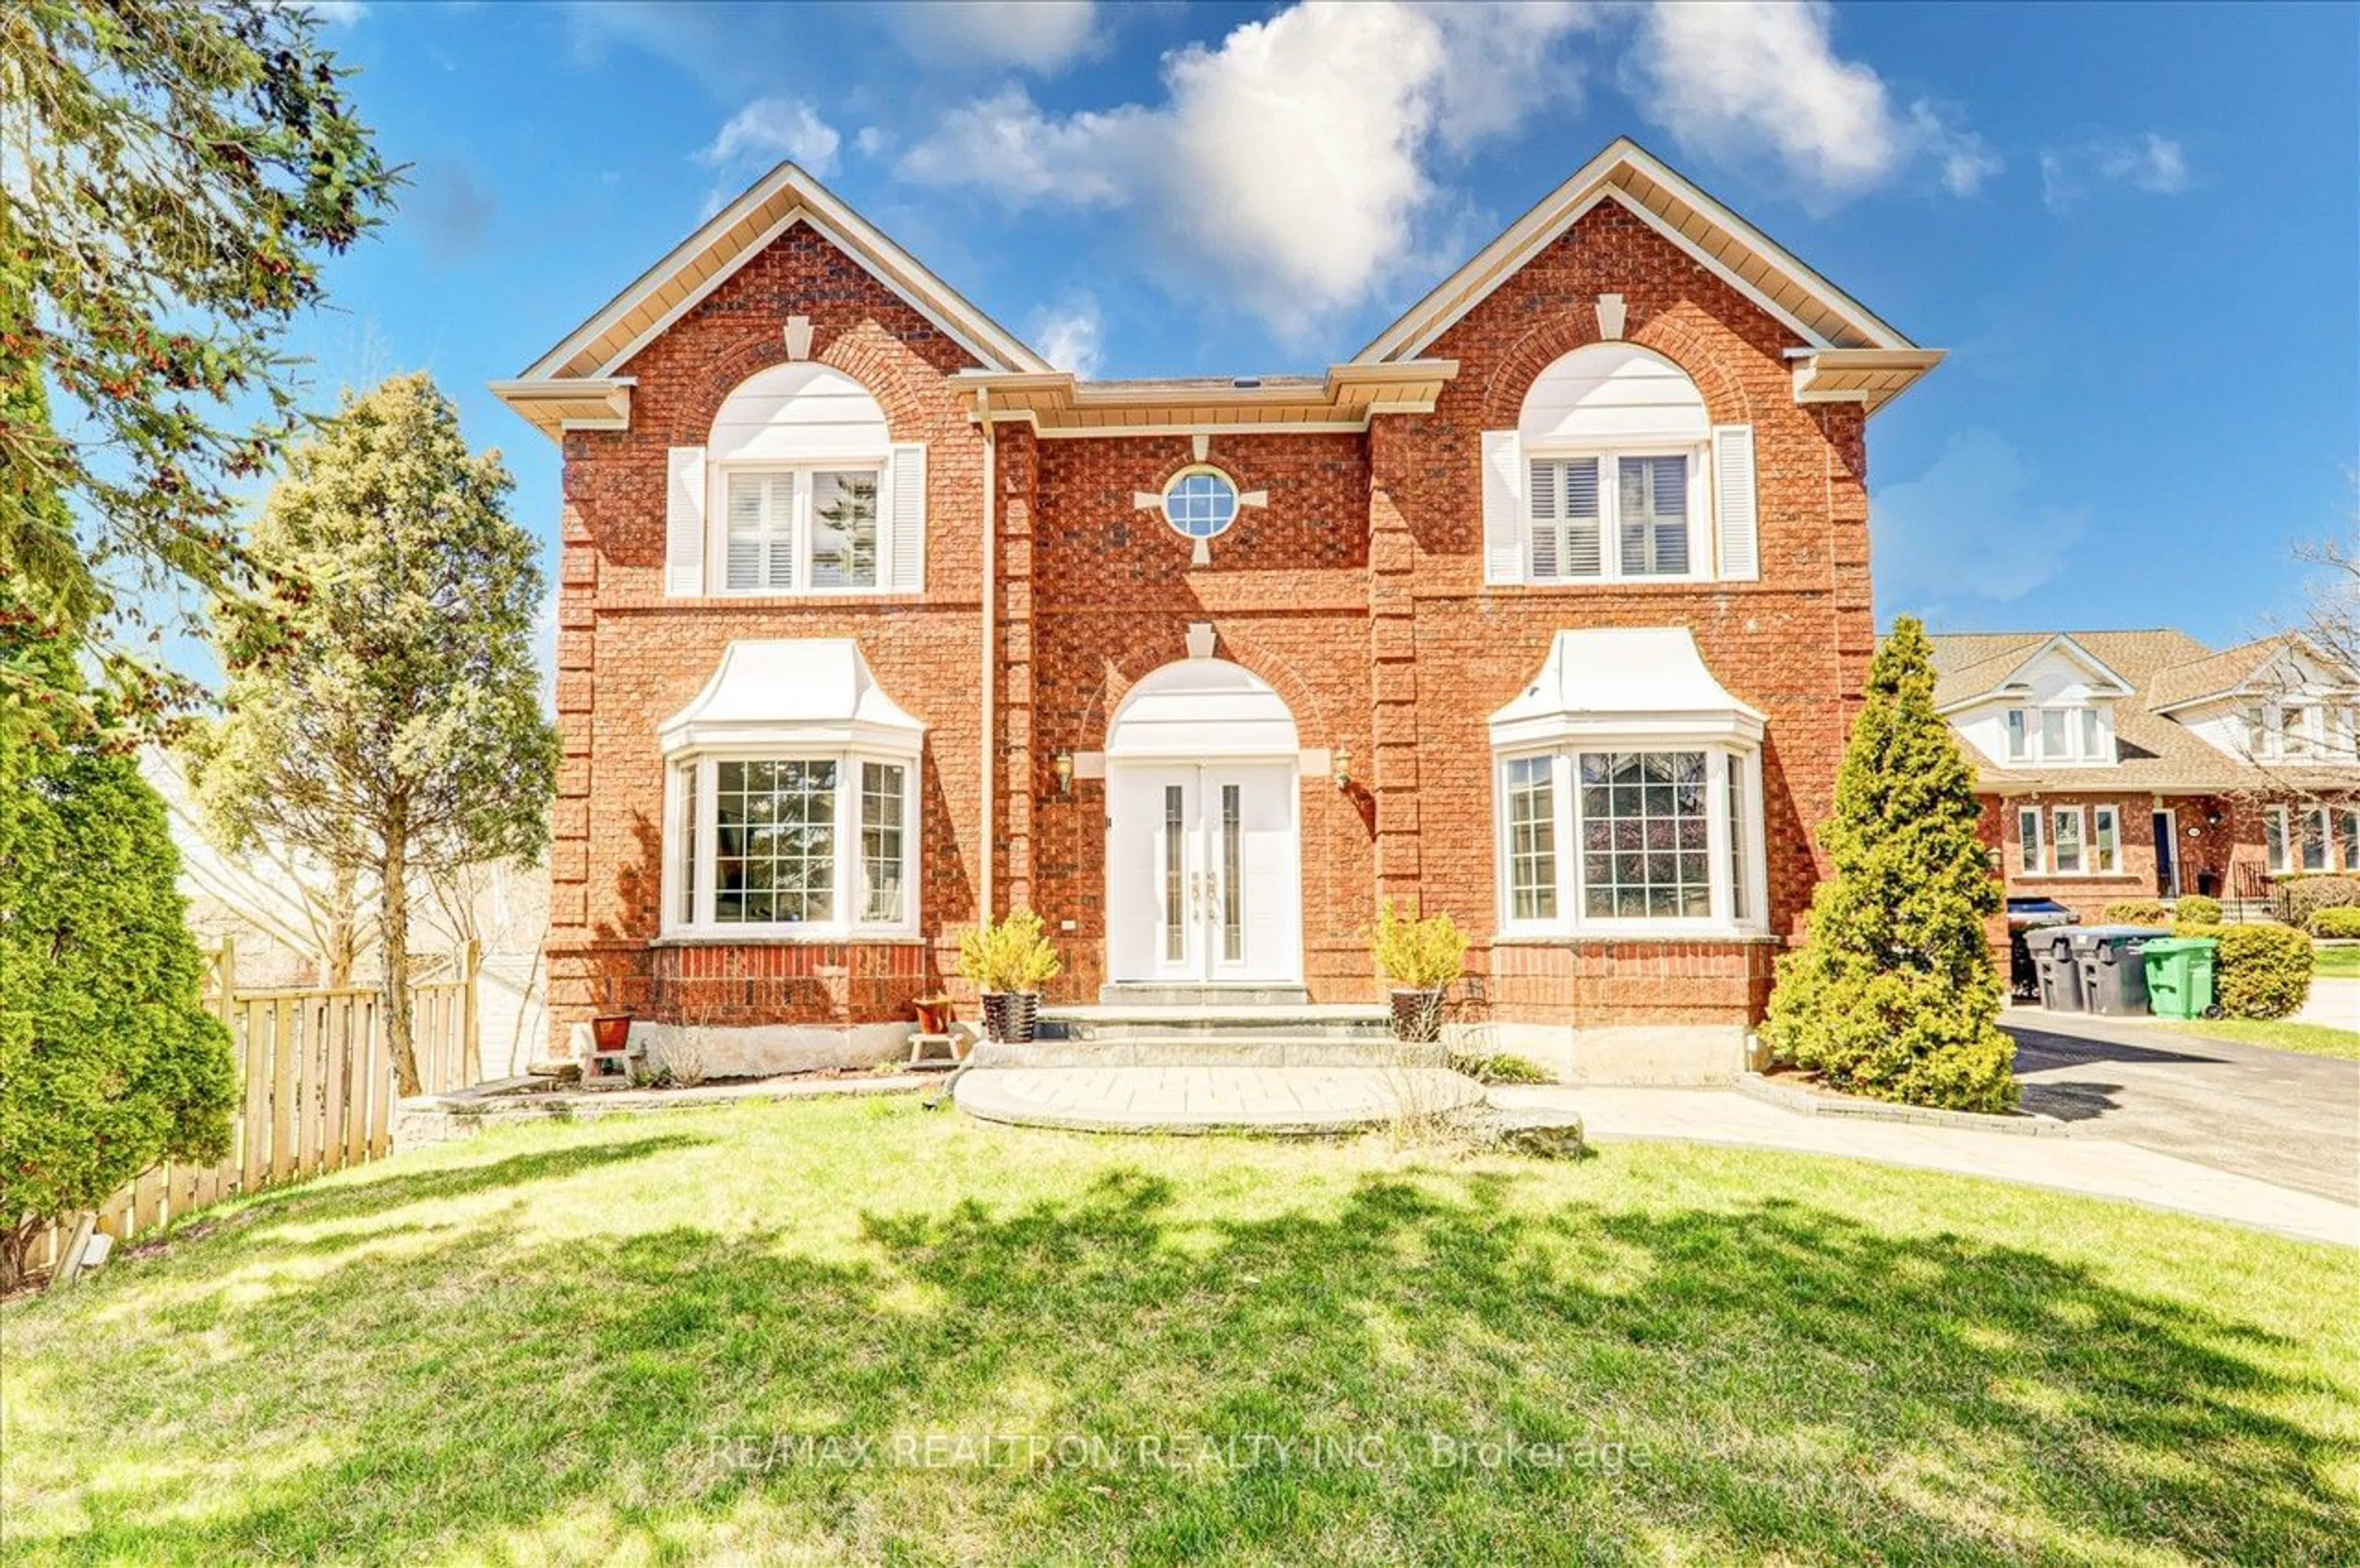 Home with brick exterior material for 3354 Trelawny Circ, Mississauga Ontario L5N 6N5